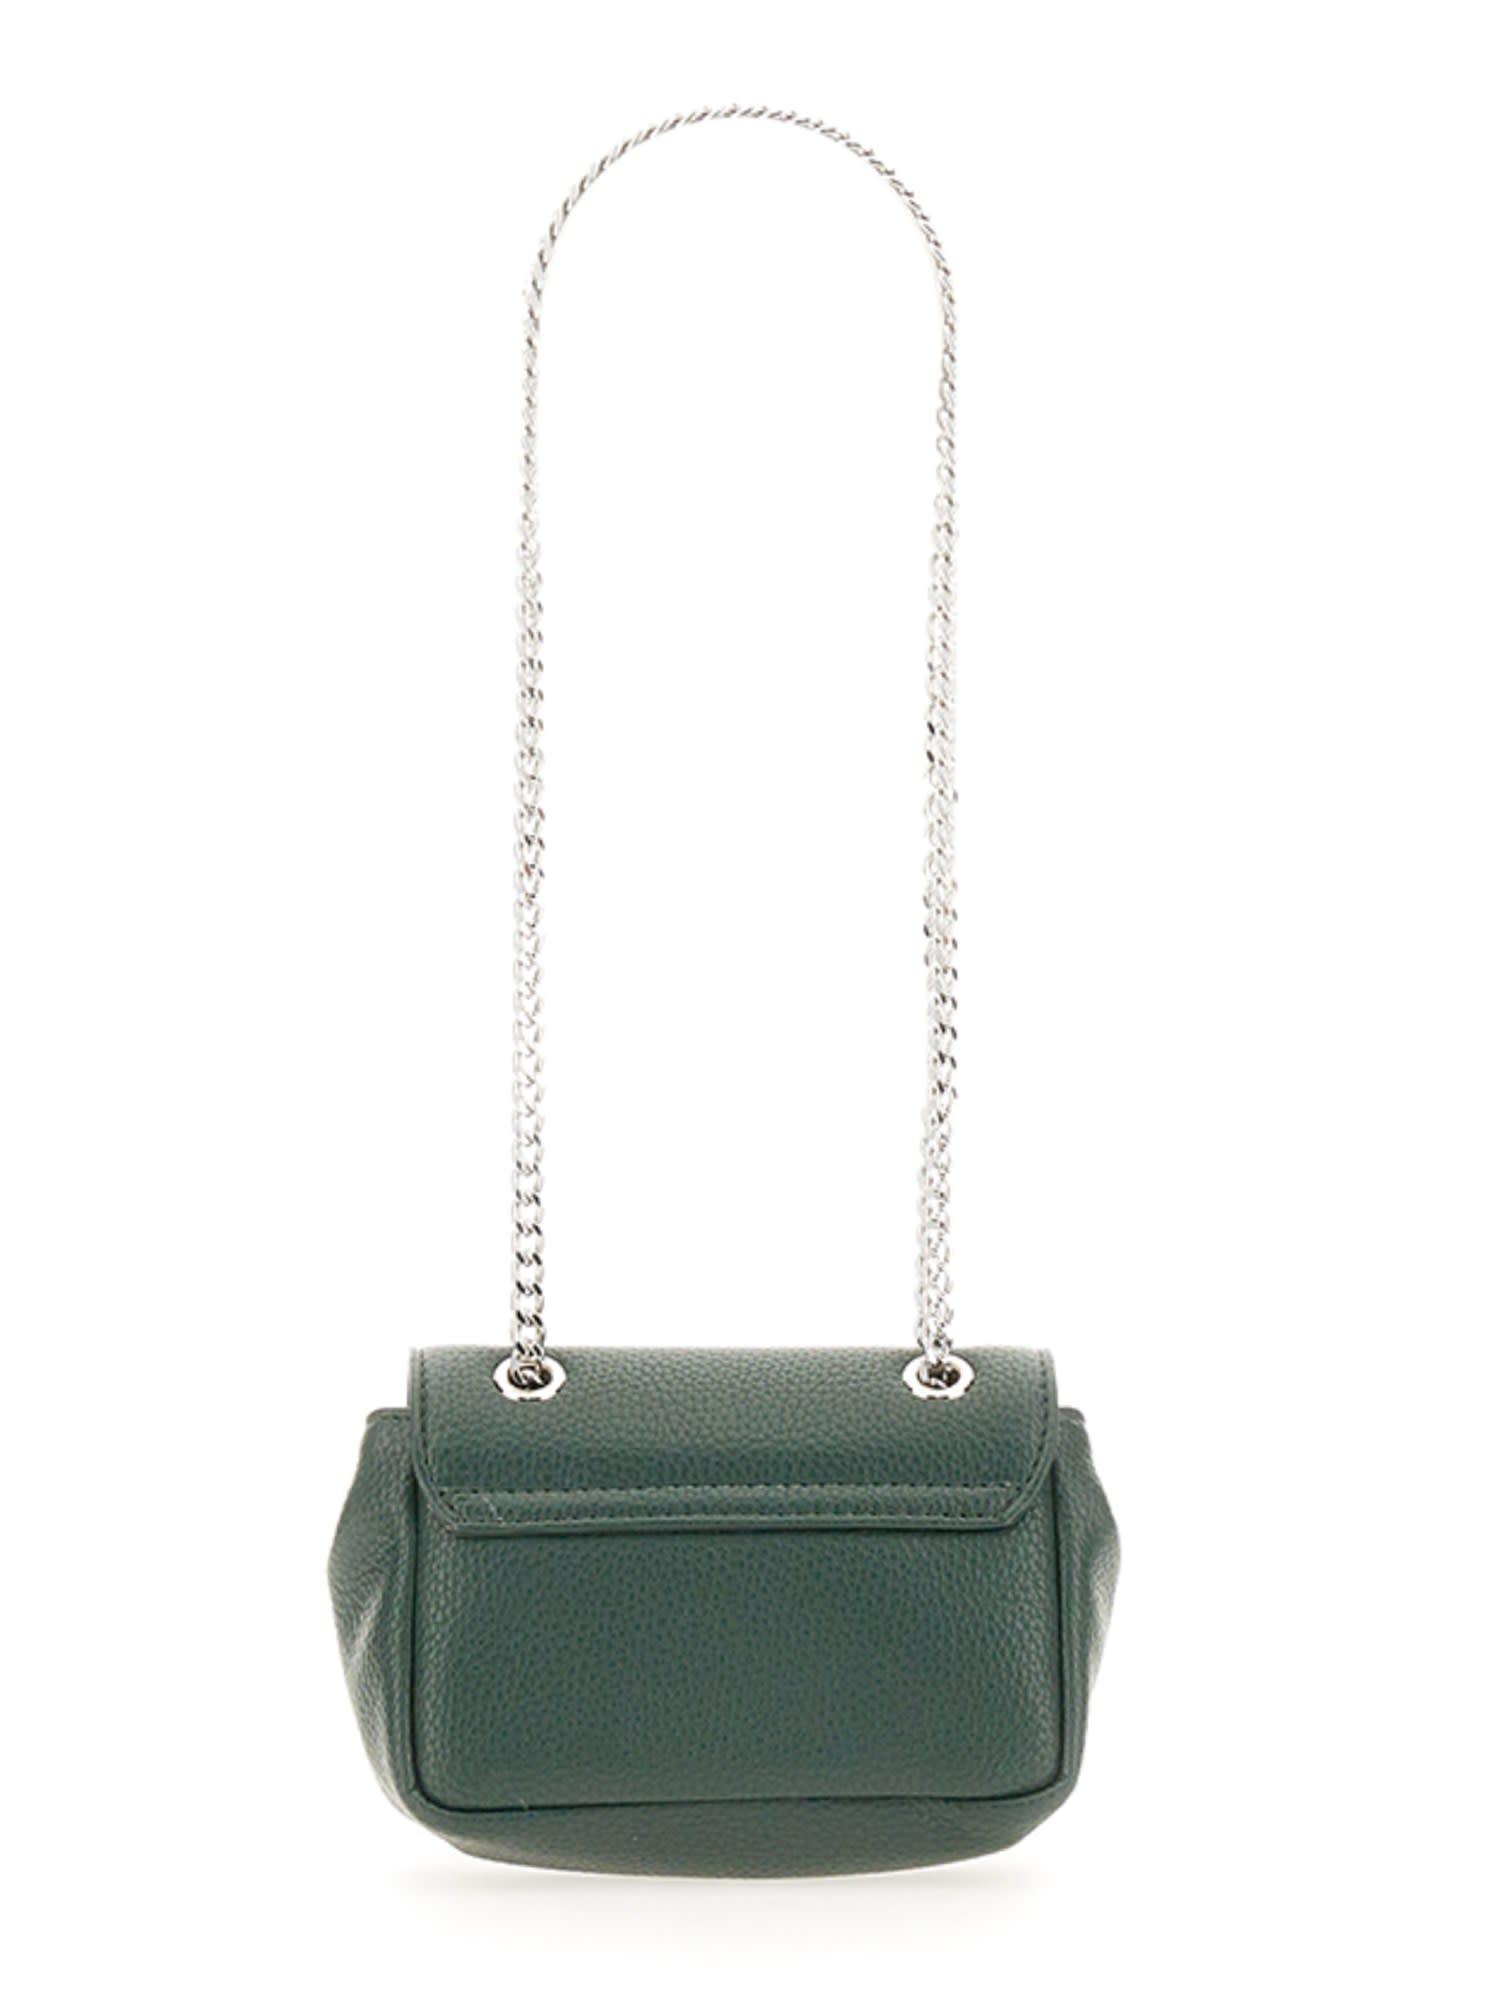 Vivienne Westwood Orb-plaque Foldover Top Mini Bag in Green | Lyst